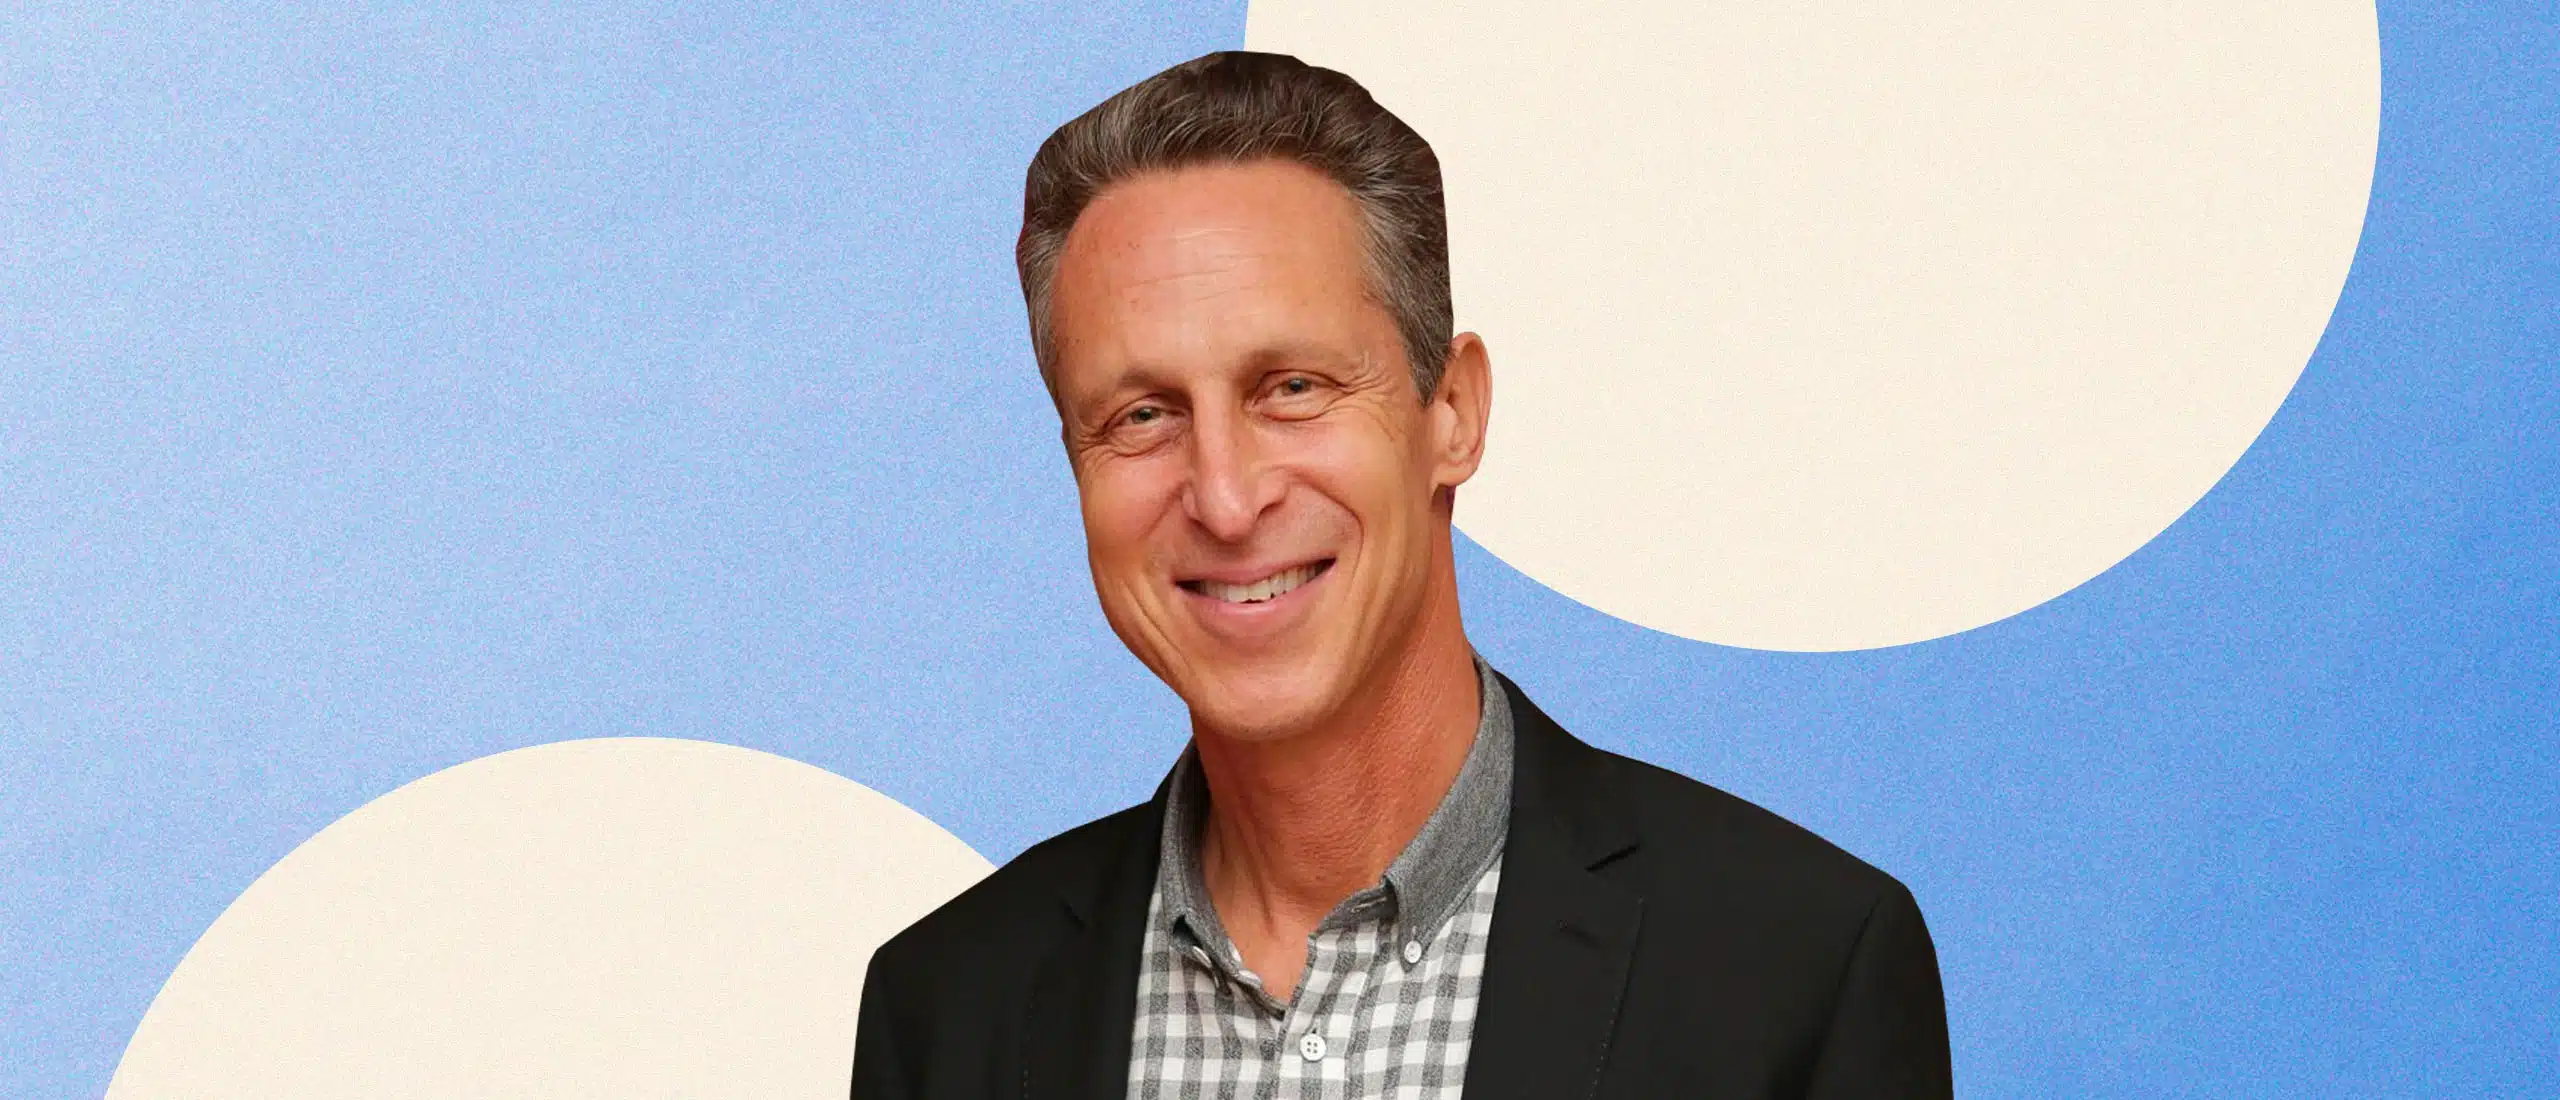 Mark Hyman on a blue background with white polka dots